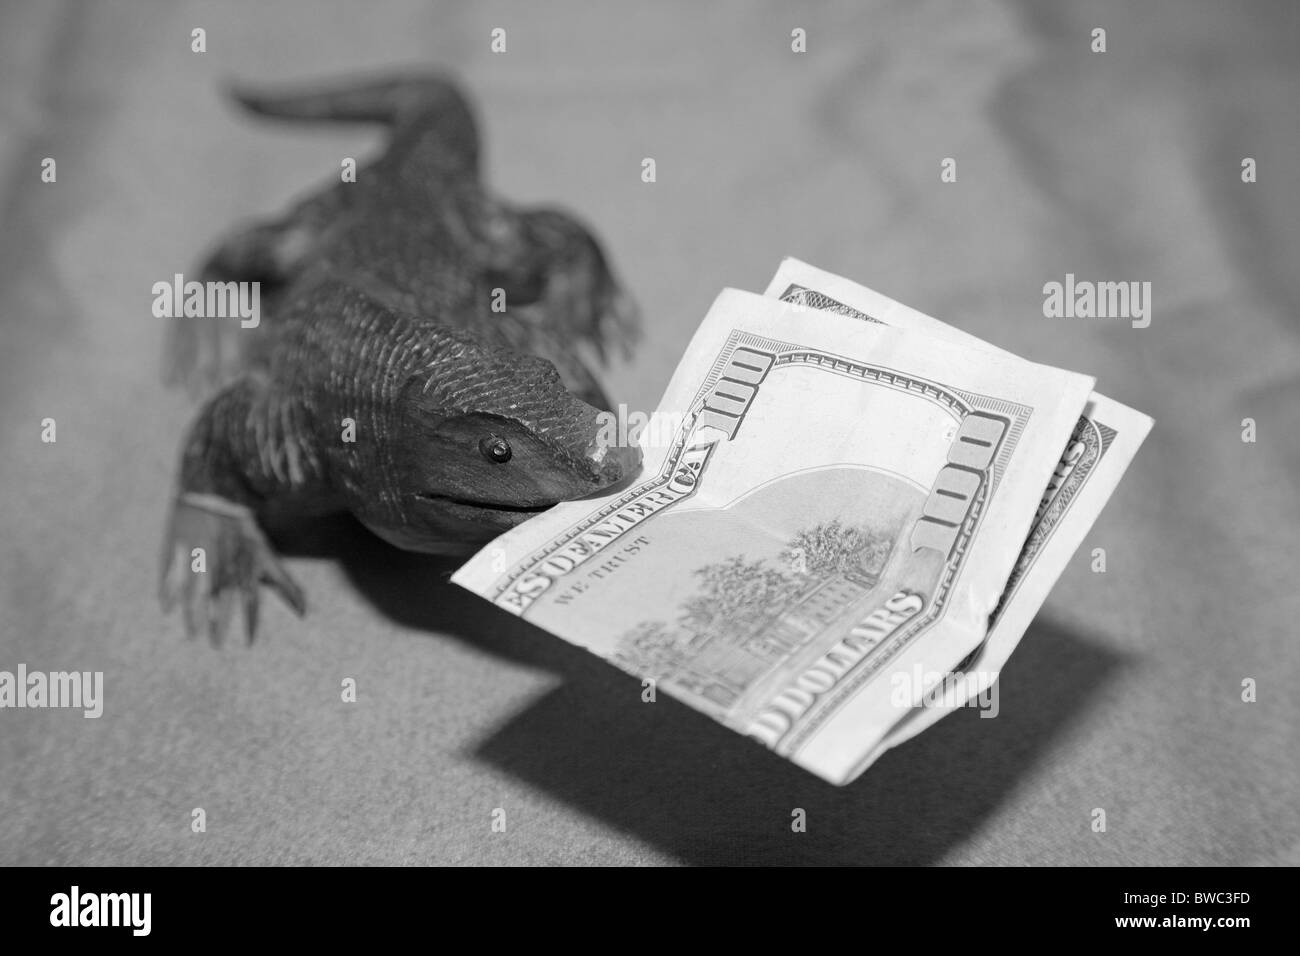 Wooden komodo dragon lizard souvenir carving biting US 100 dollar bill currency bank note in it's mouth Stock Photo